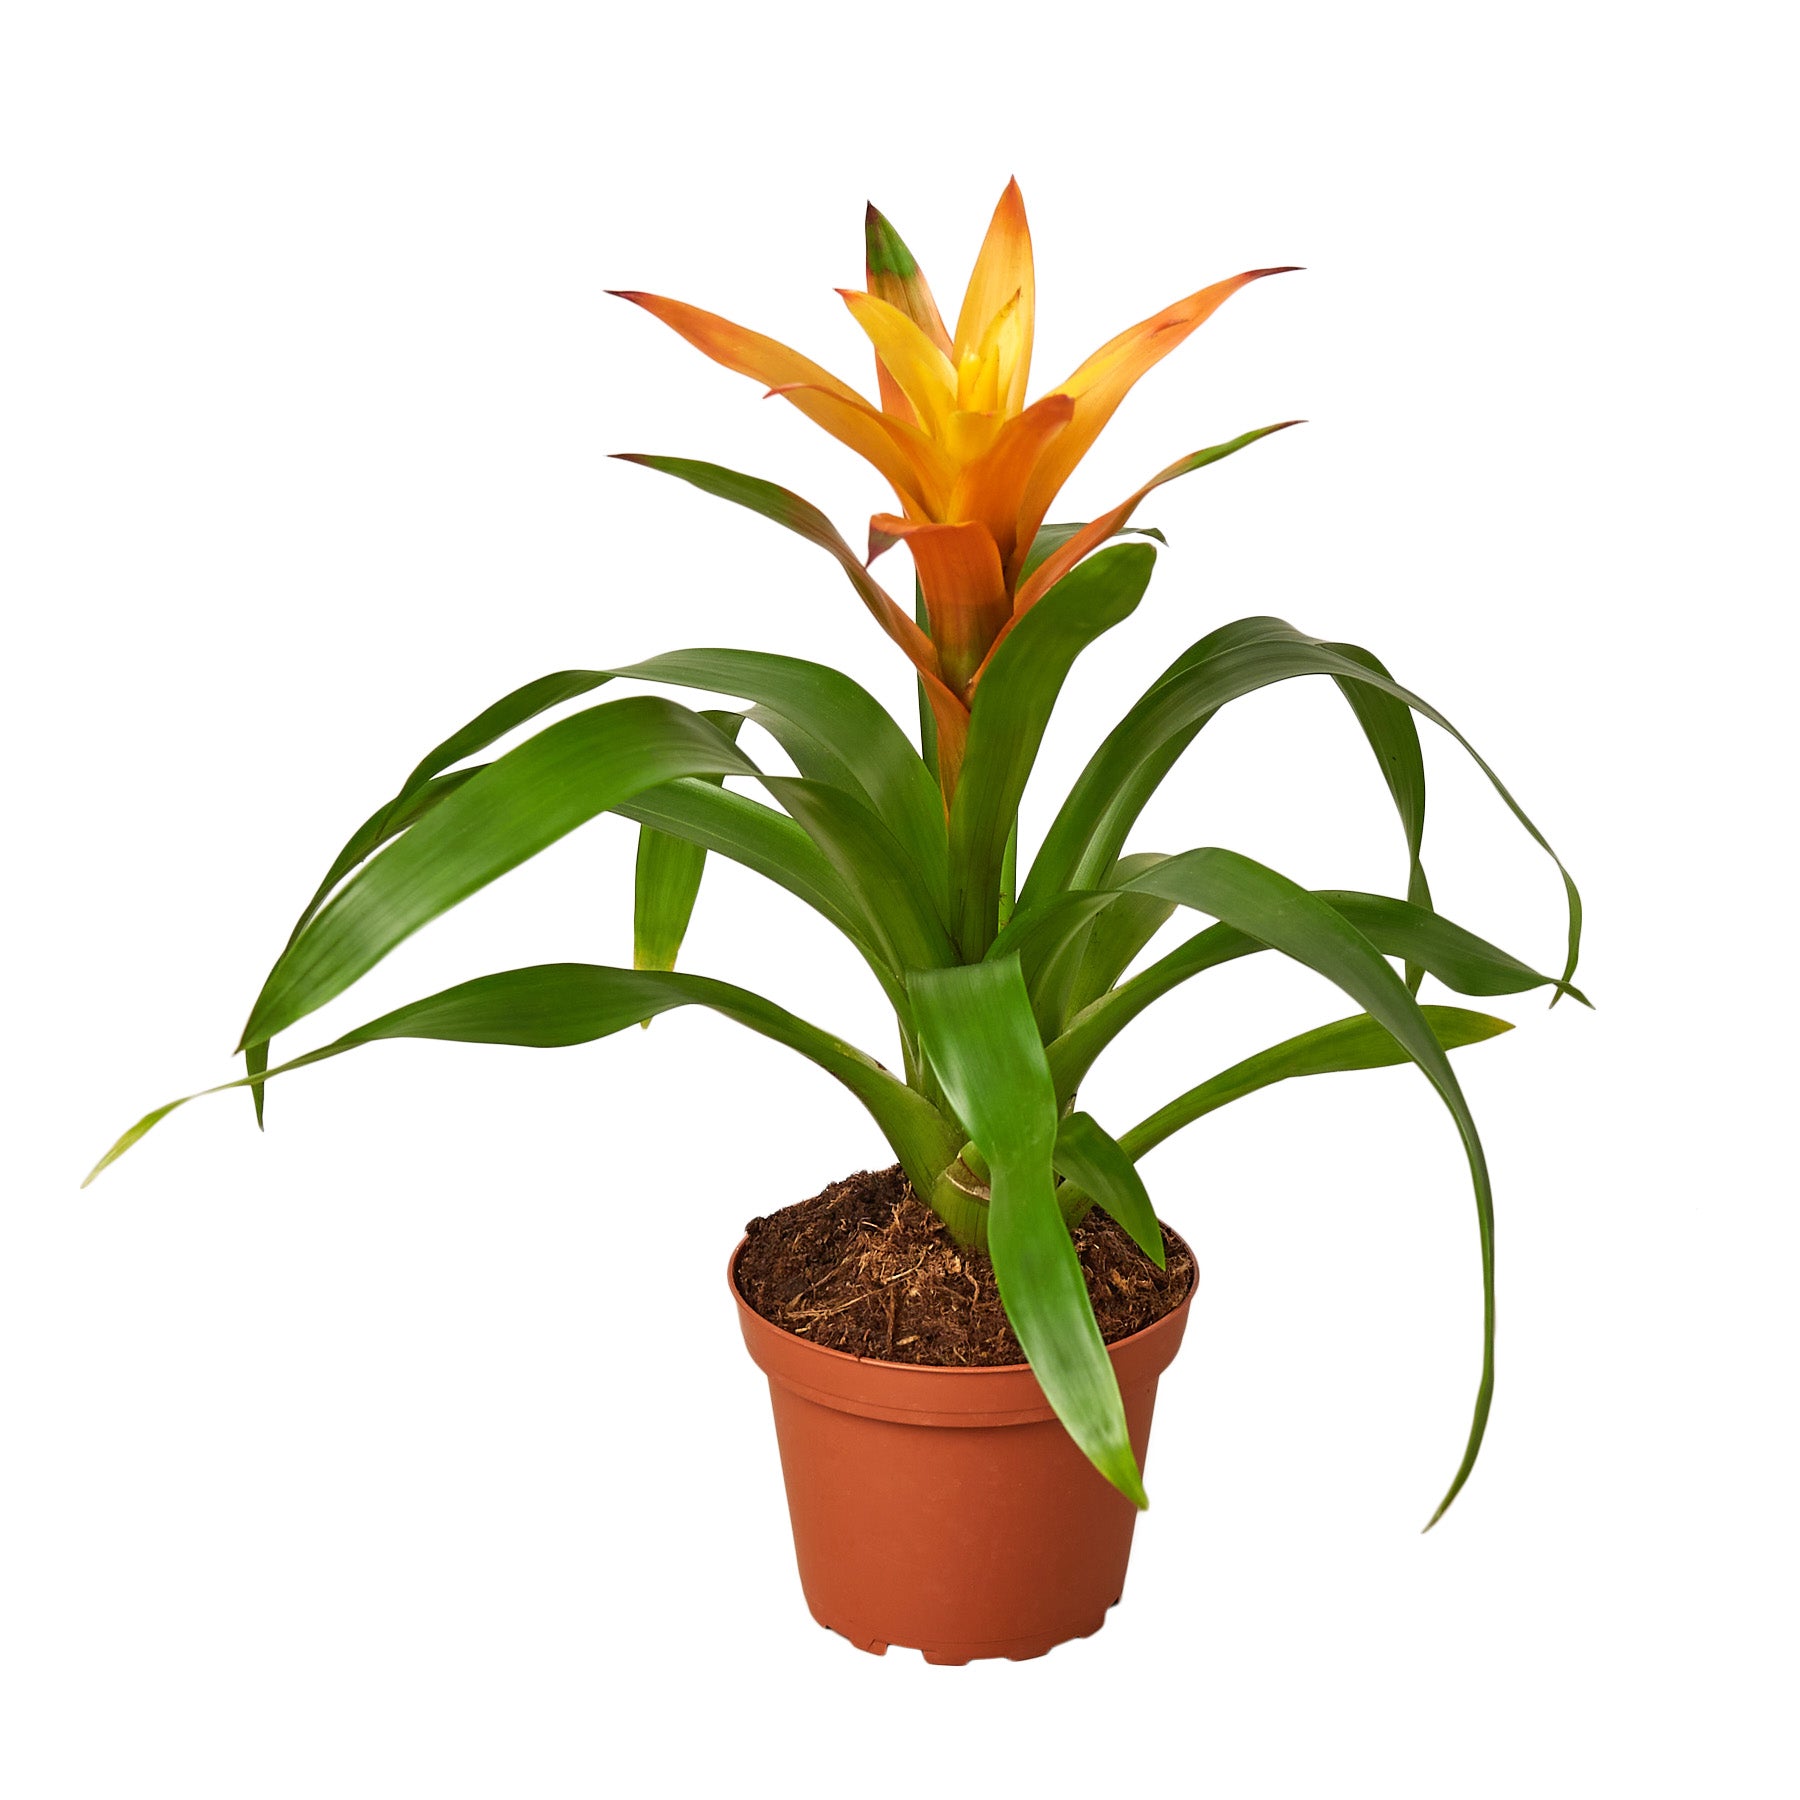 A tropical plant in a pot on a white background available at the best plant nursery near me.